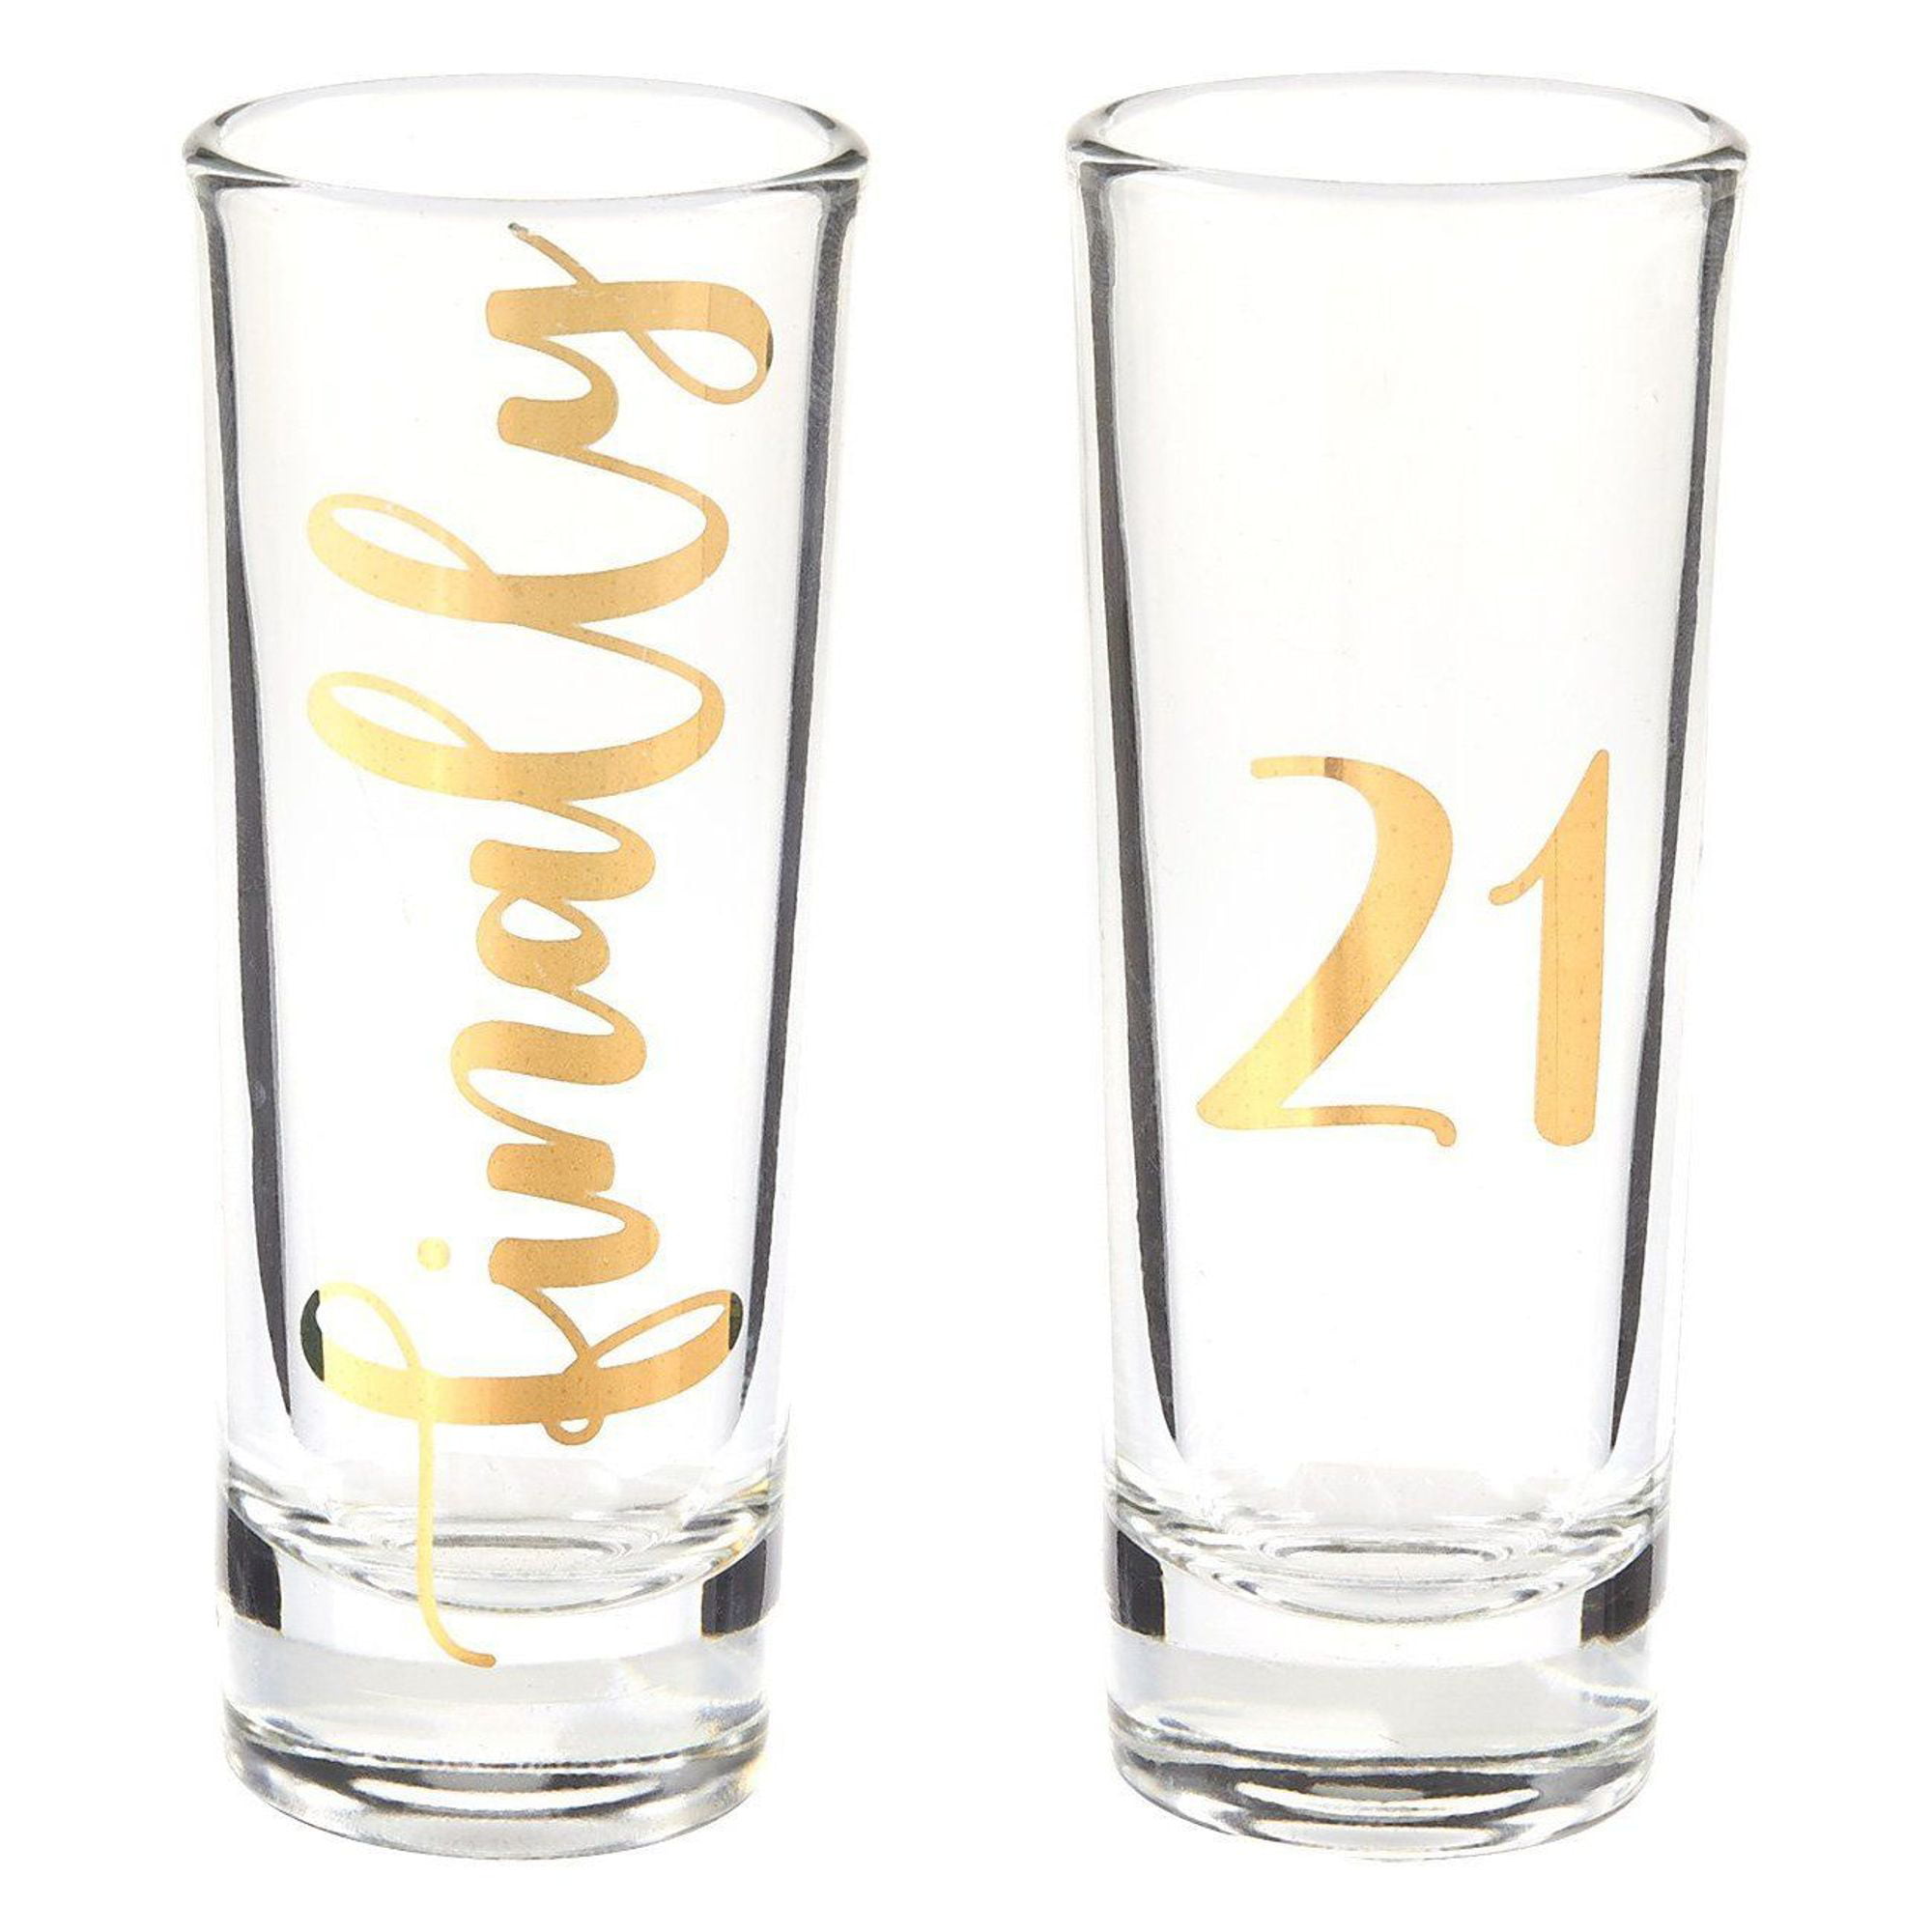 Dirty Thirty Shot Glasses Pair with Gold Foil Print for Celebrating Turning 30 Novelty Birthday Gift Party Favors- Set of 2 2 oz Each 